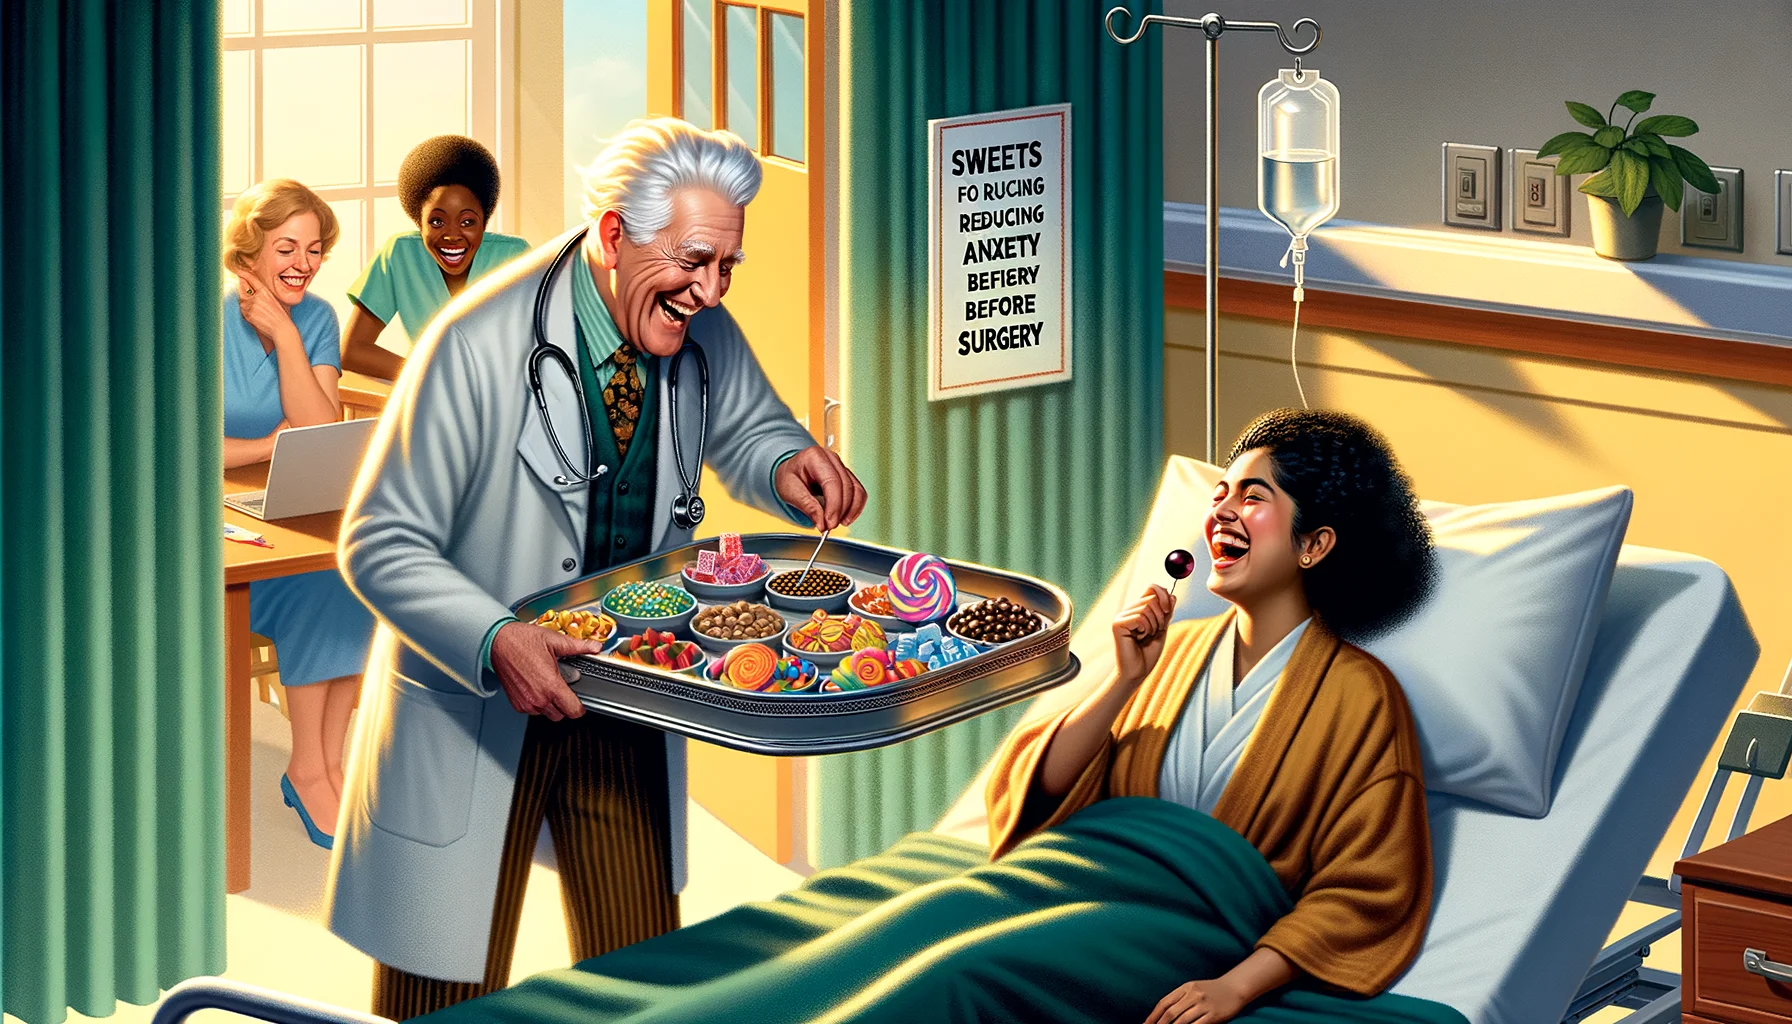 An amusing yet realistic illustration showcasing a situation in a bustling hospital. An elderly male doctor of European descent is joyfully presenting a colorful assortment of sweets and candies from a silver tray to a young woman with a South Asian descent, dressed in a robe, sitting anxiously on a hospital bed. She’s laughing and picking a lollipop. On the bedside table, a sign titled 'Sweets for Reducing Anxiety Before Surgery'. A nurse, a black woman, is chuckling while looking at them from the door frame. The room is filled with sunshine giving a warm and hopeful ambiance.